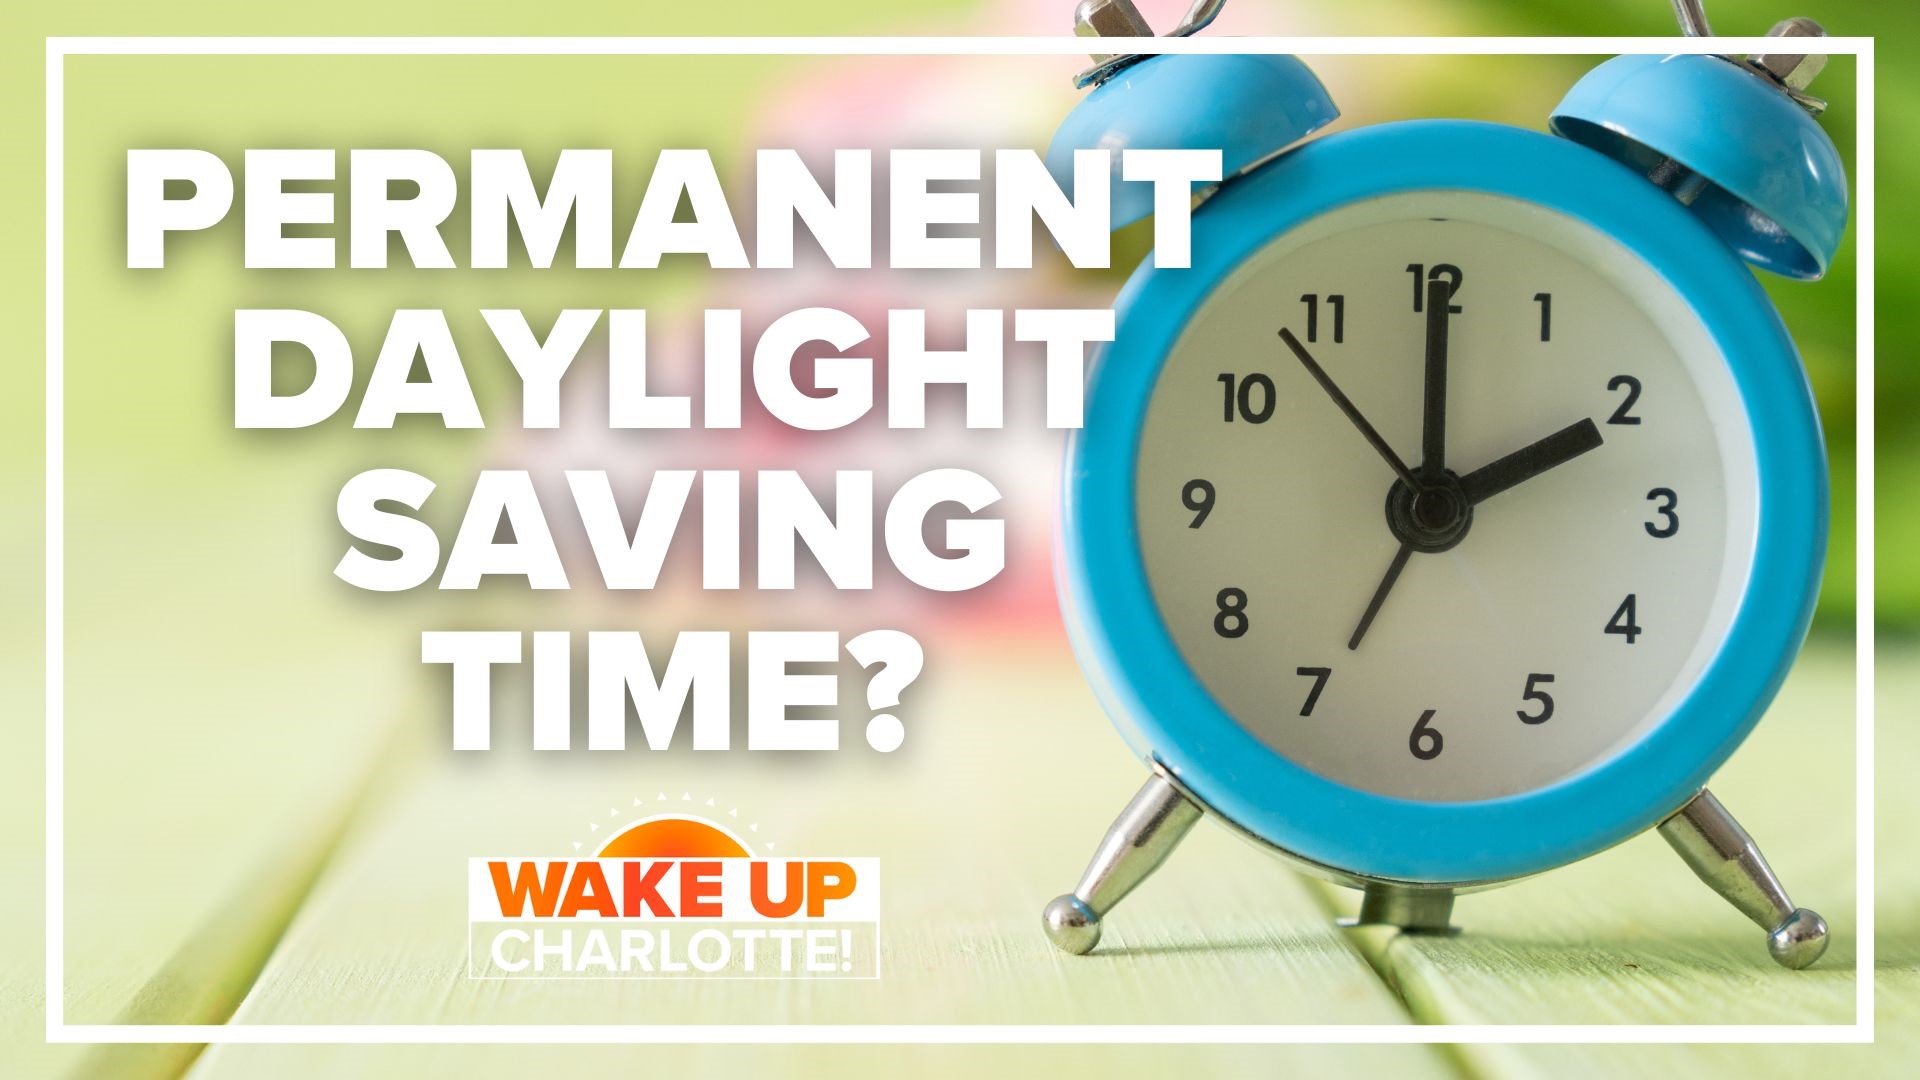 It's that time of year. We spring forward this weekend as daylight saving time begins. How are you feeling about the time change? Plus a busy weekend for Charlotte.